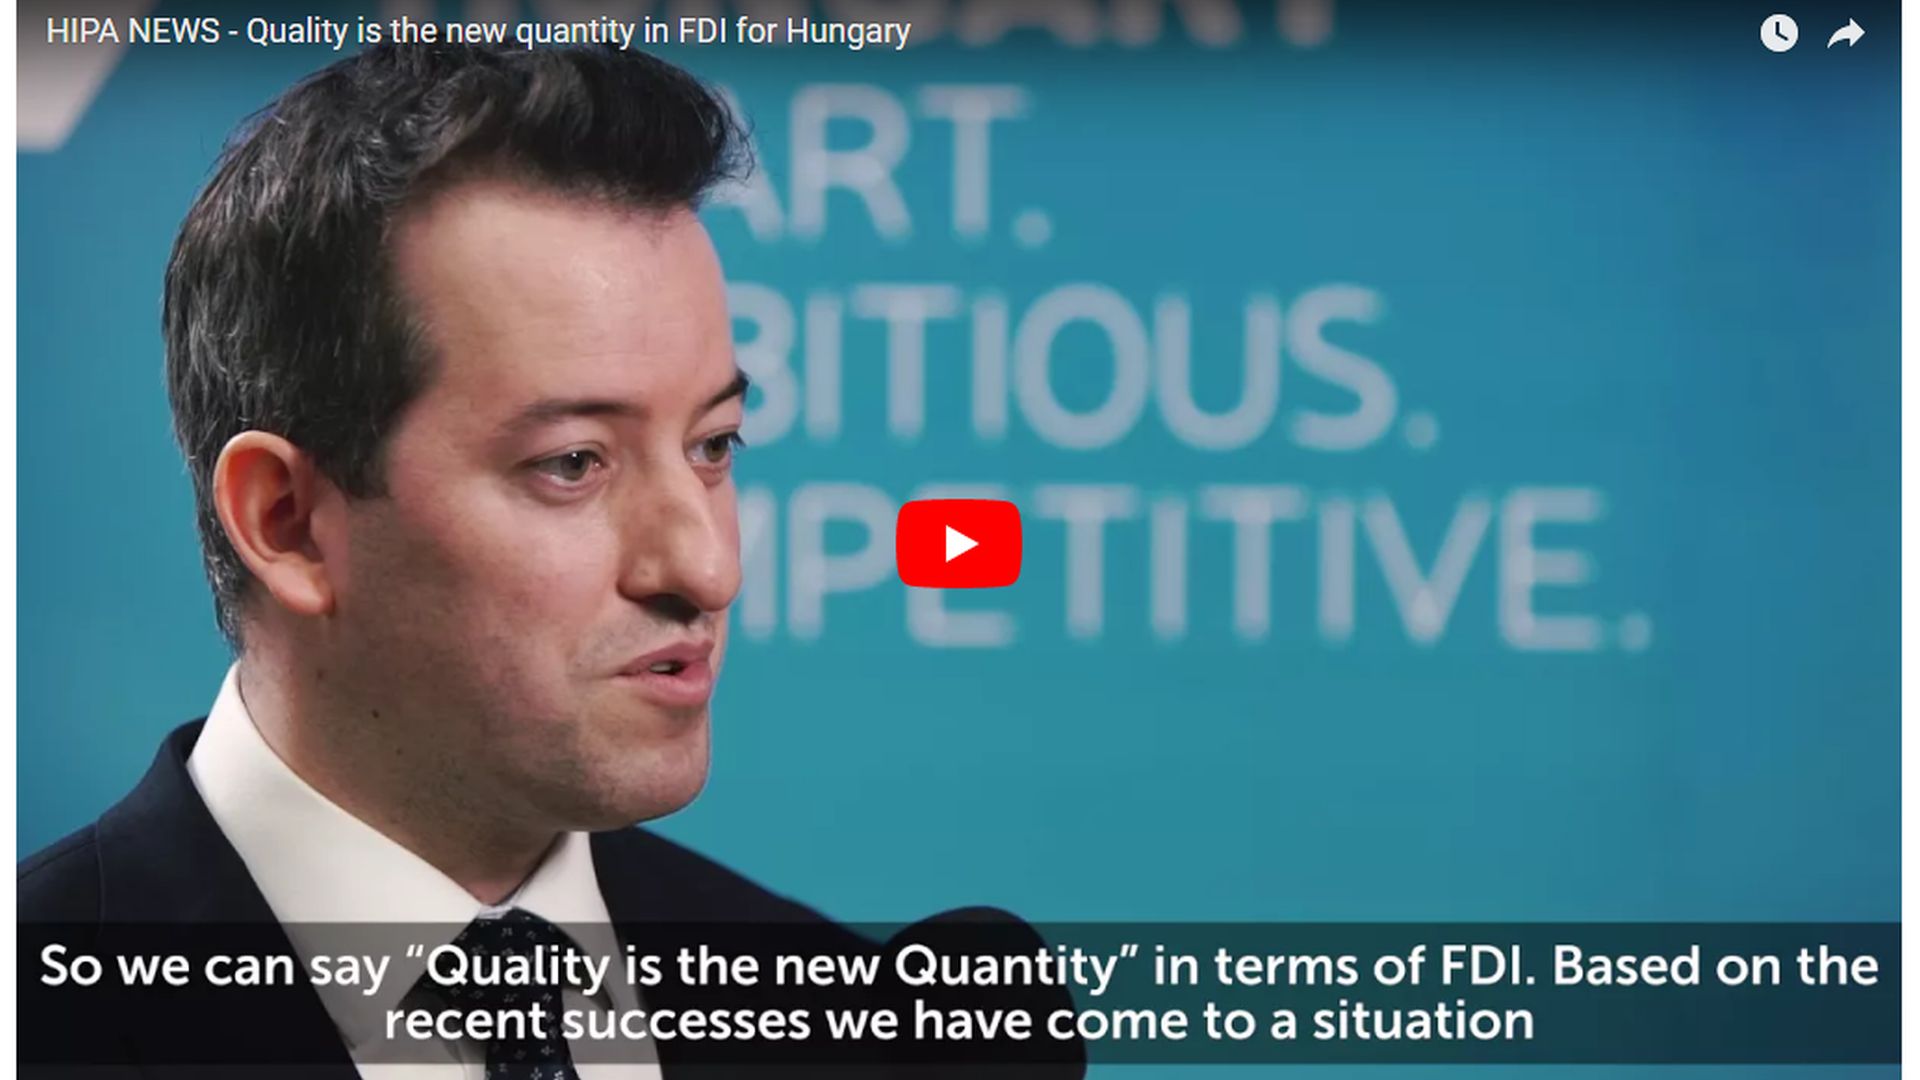 Quality is the new quantity in FDI for Hungary